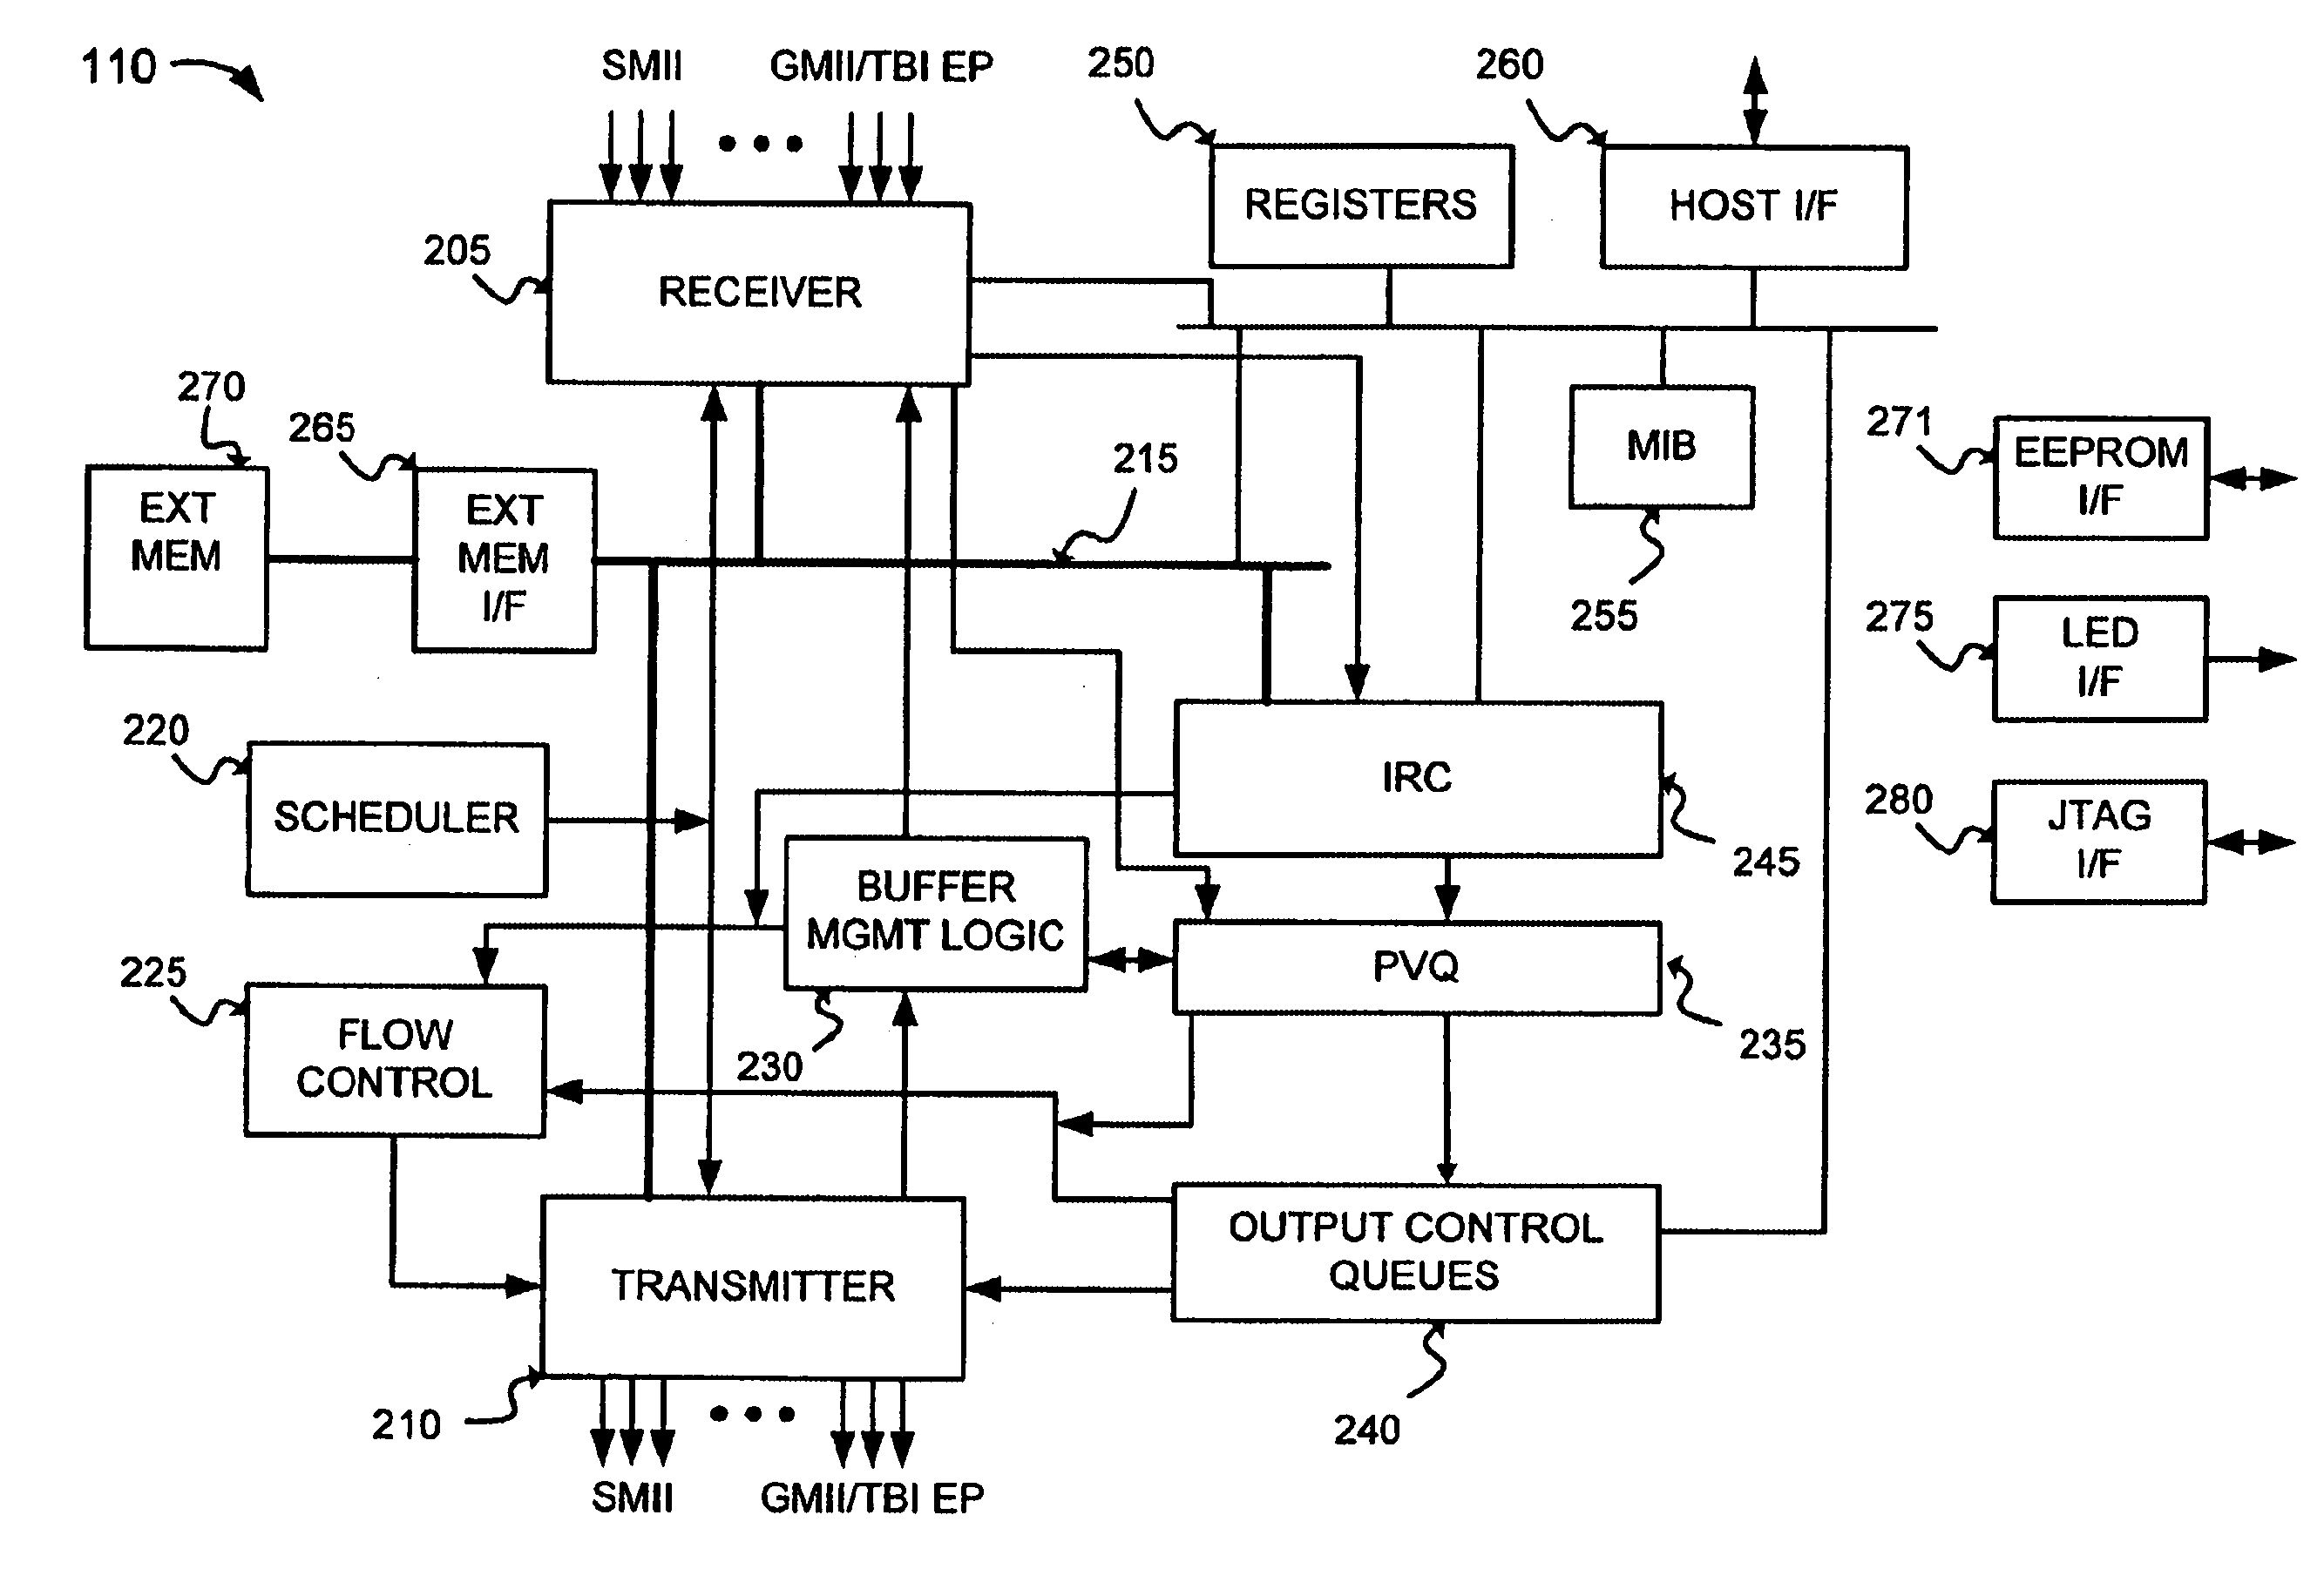 Address modification within a switching device in a packet-switched network